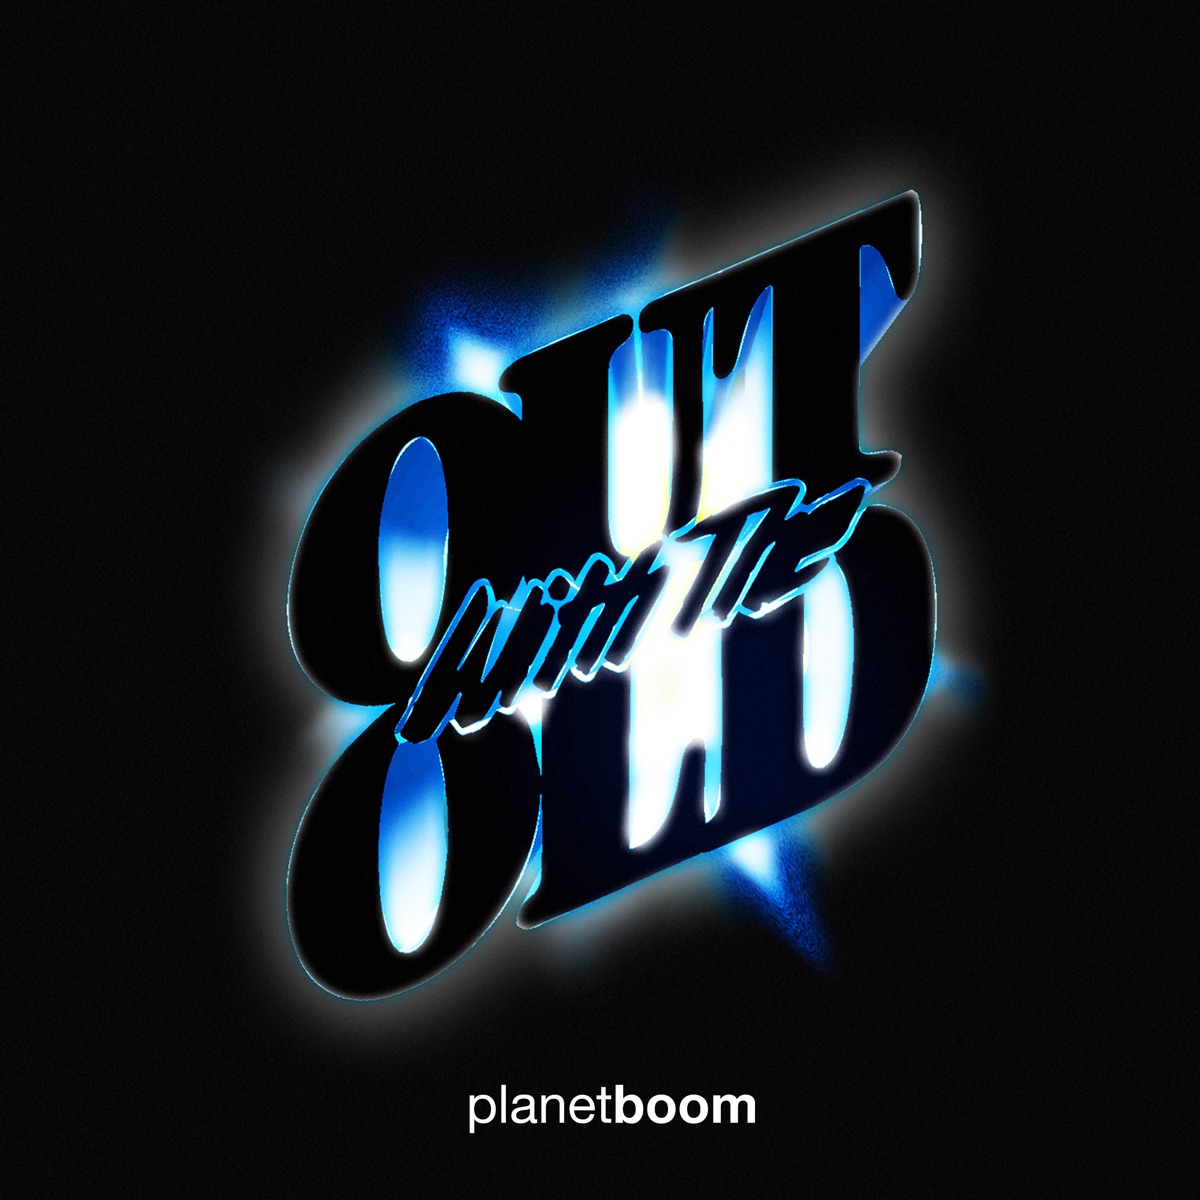 Greatest in the World - Single - Album by planetboom - Apple Music